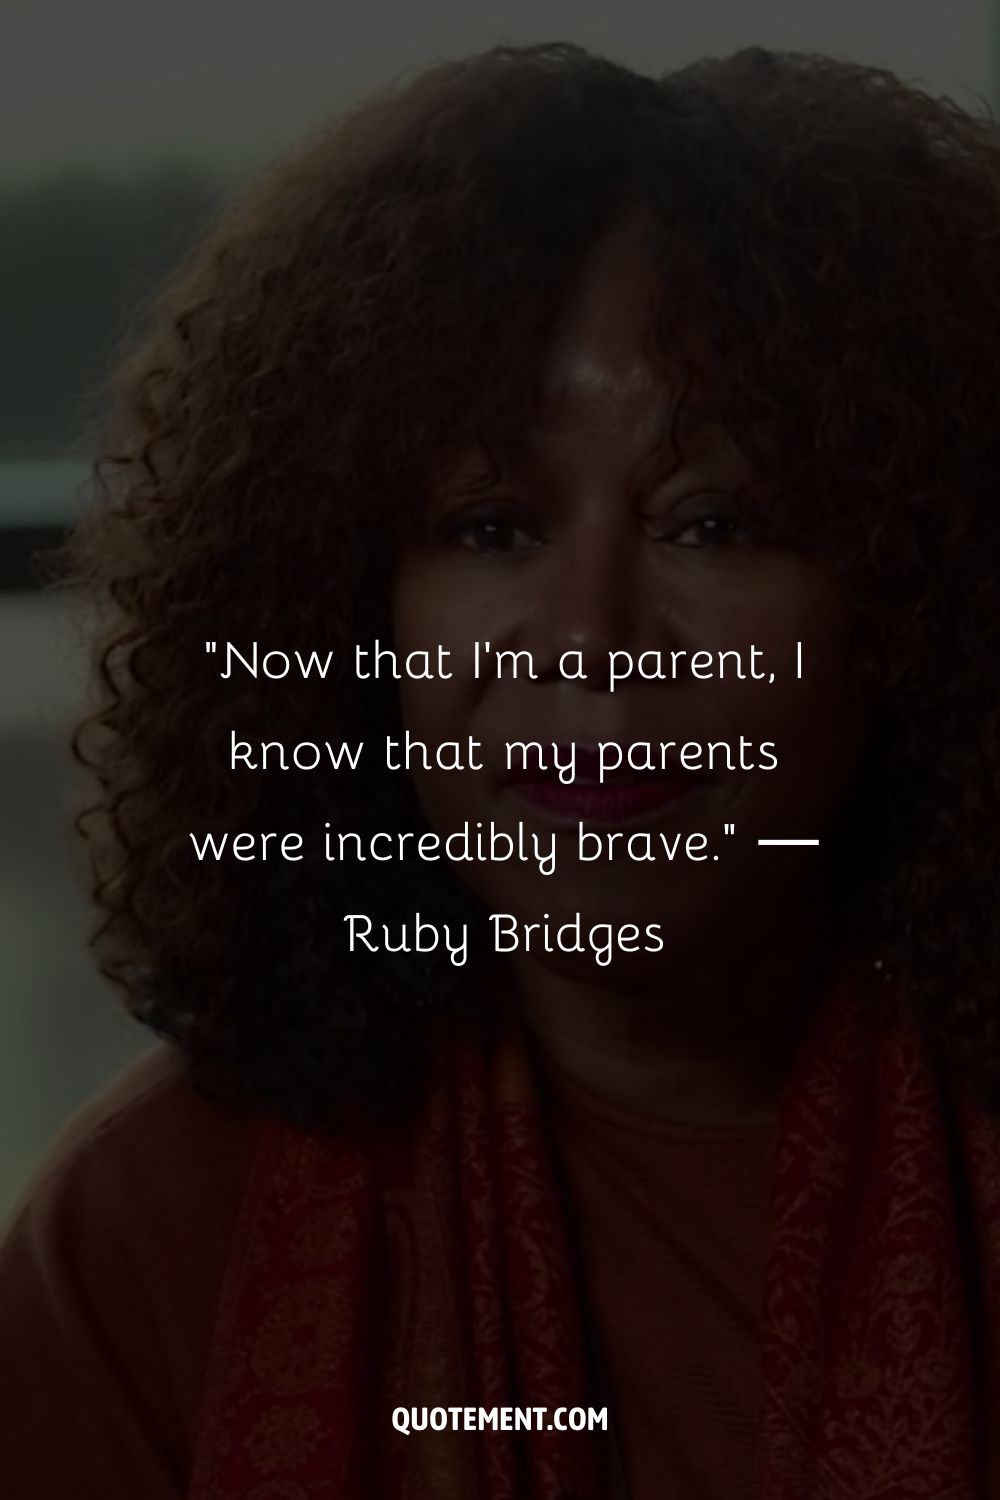 Now that I'm a parent, I know that my parents were incredibly brave